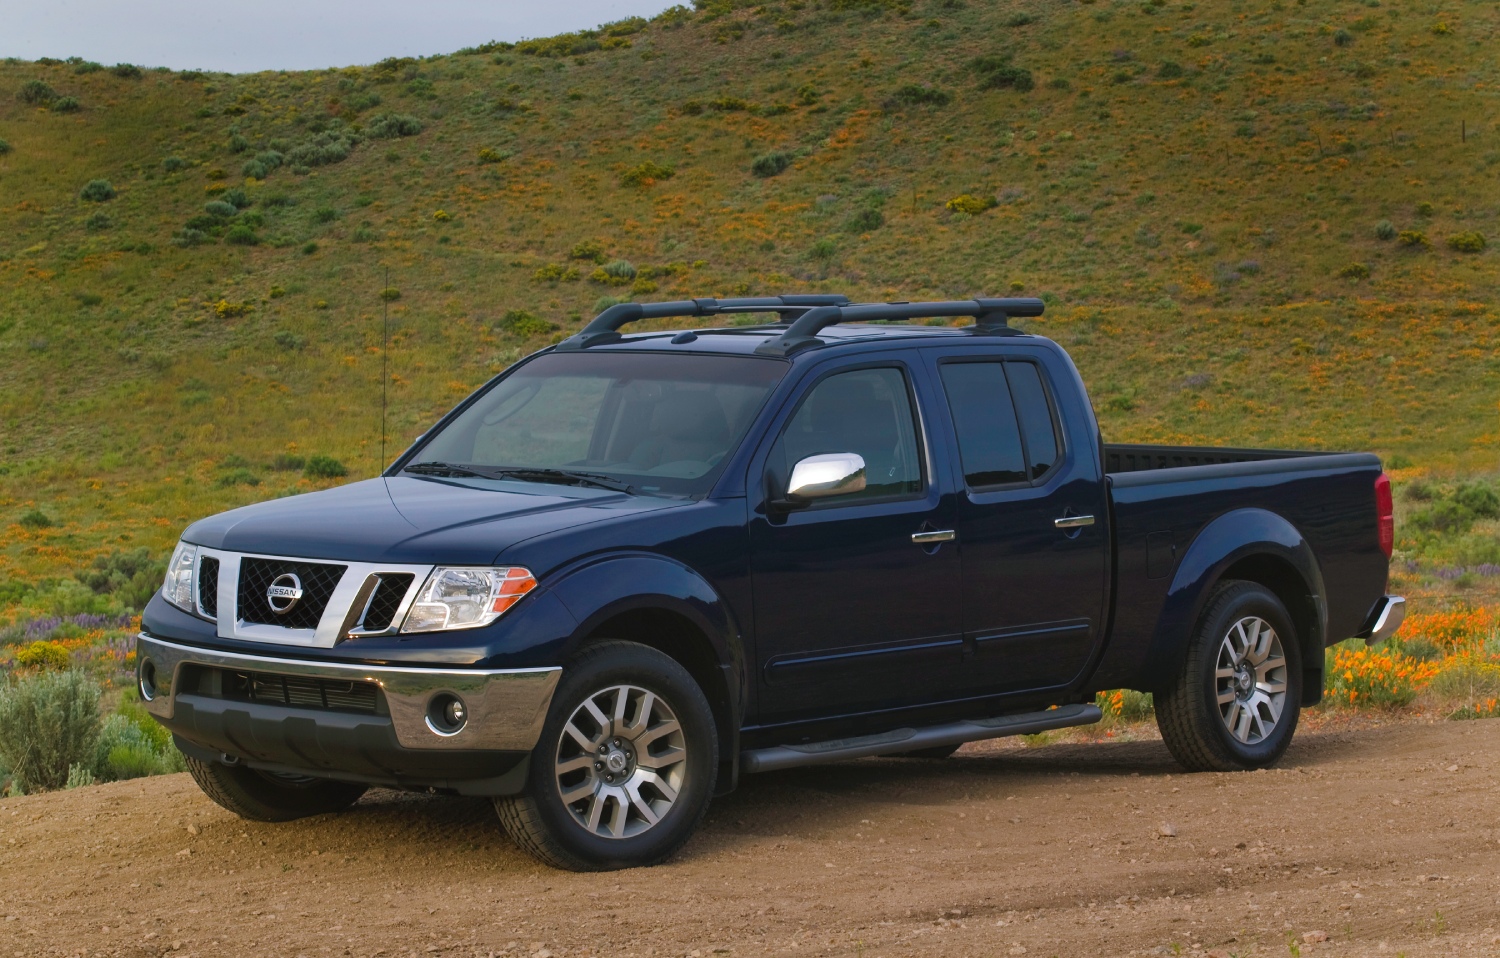 The best used compact trucks under $20,000 include the 2009 Nissan Frontier